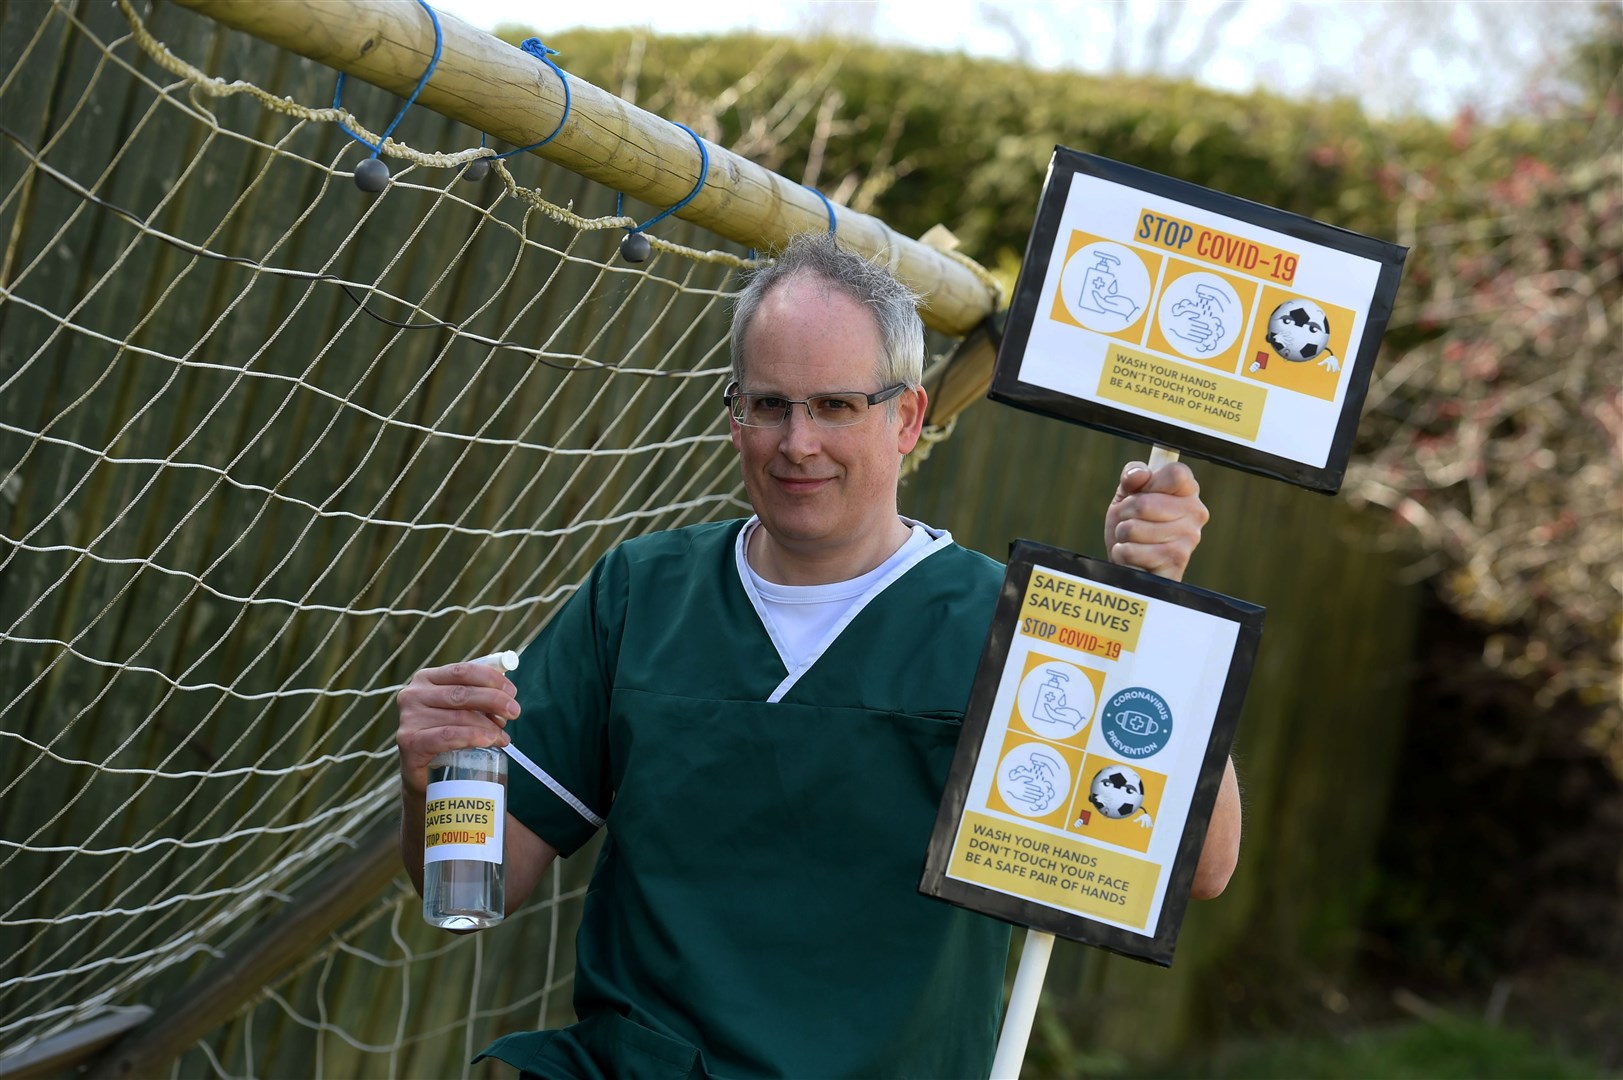 GP Dr Ross Jaffrey launched the Safe Hands, Saves Lives group near the start of the pandemic. It has now marked its first anniversary of existence. Picture: Callum Mackay